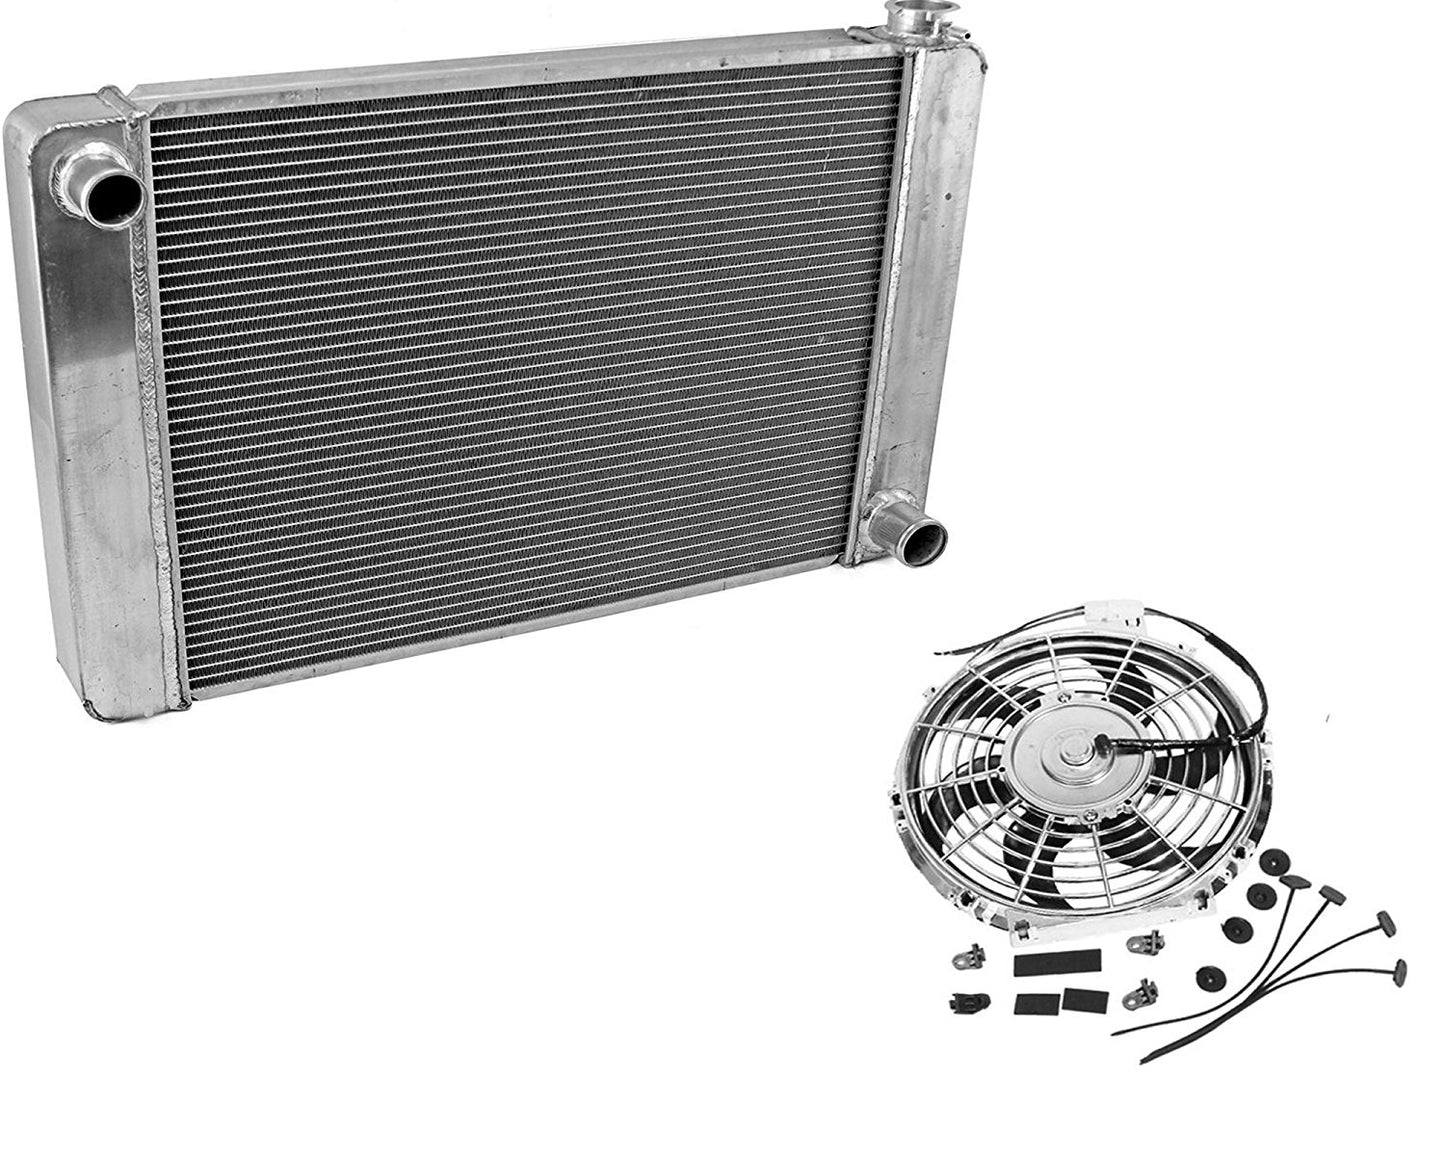 For SBC BBC Chevy GM Fabricated Aluminum Radiator 21" x 19" x3" &Electric 10" Chrome Curved Blade Cooling Fan